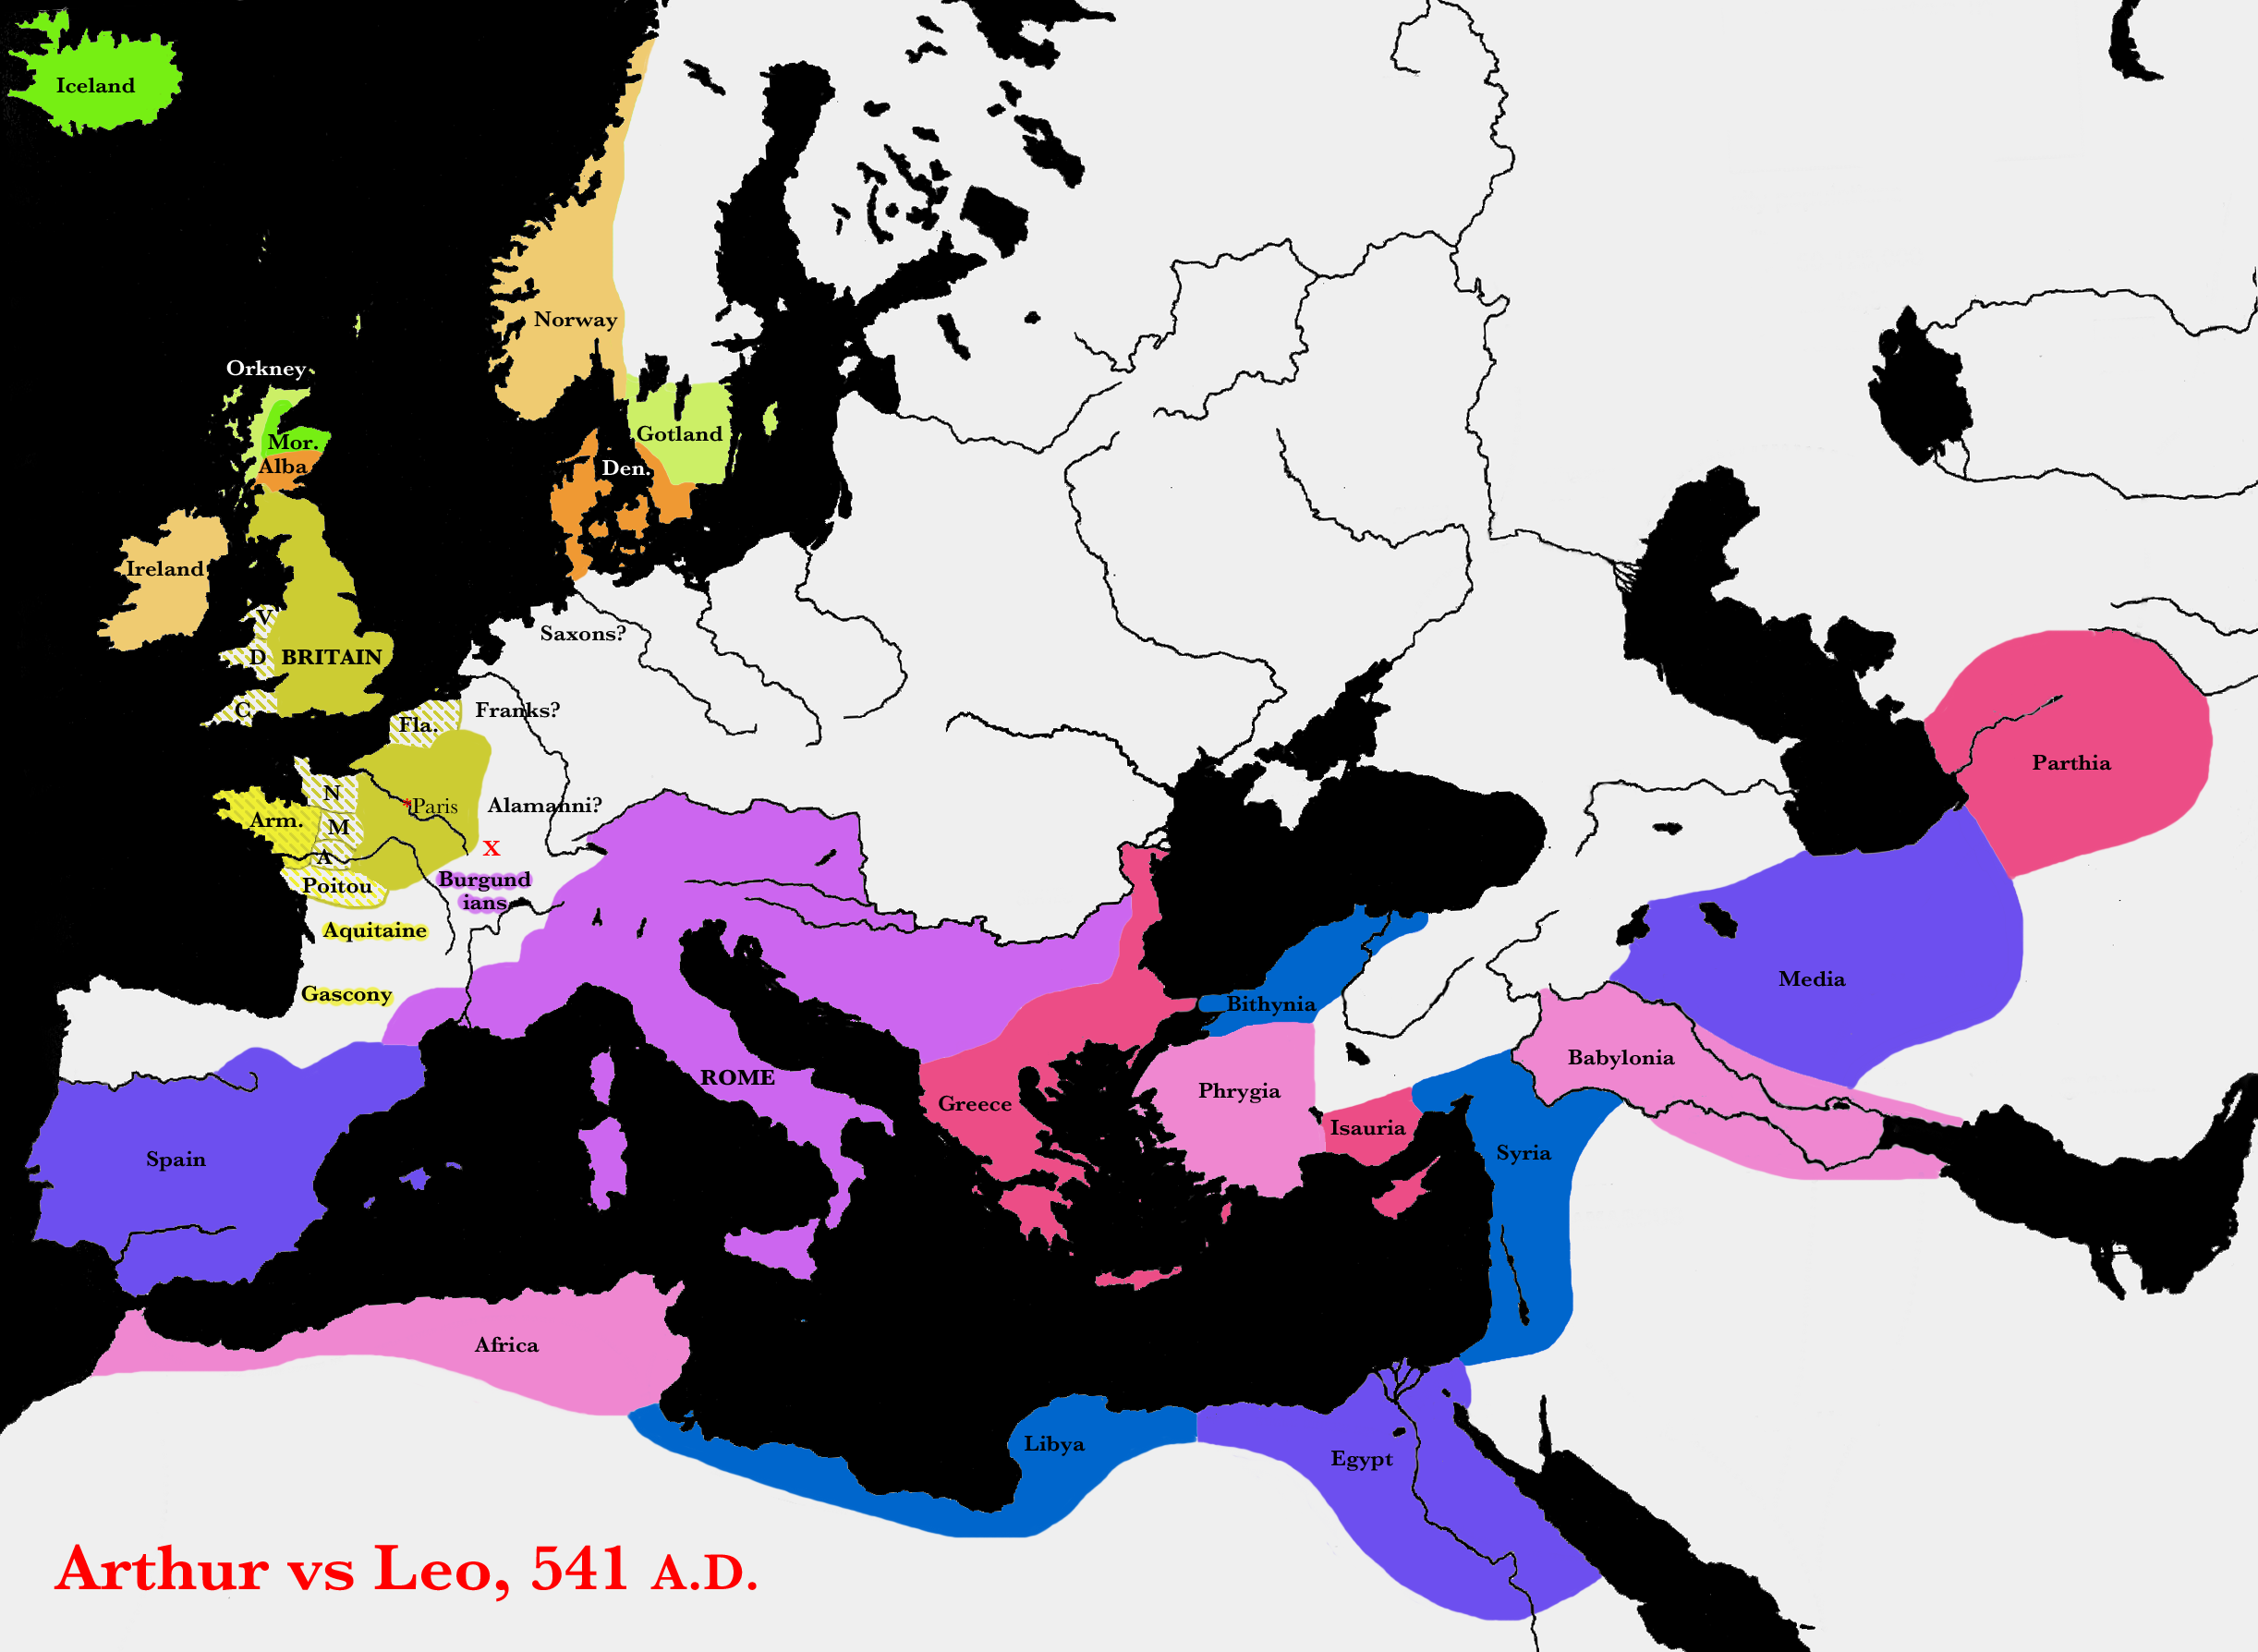 Alternate or pseudo-history map of the realms of King Arthur and Emperor Leo in 541